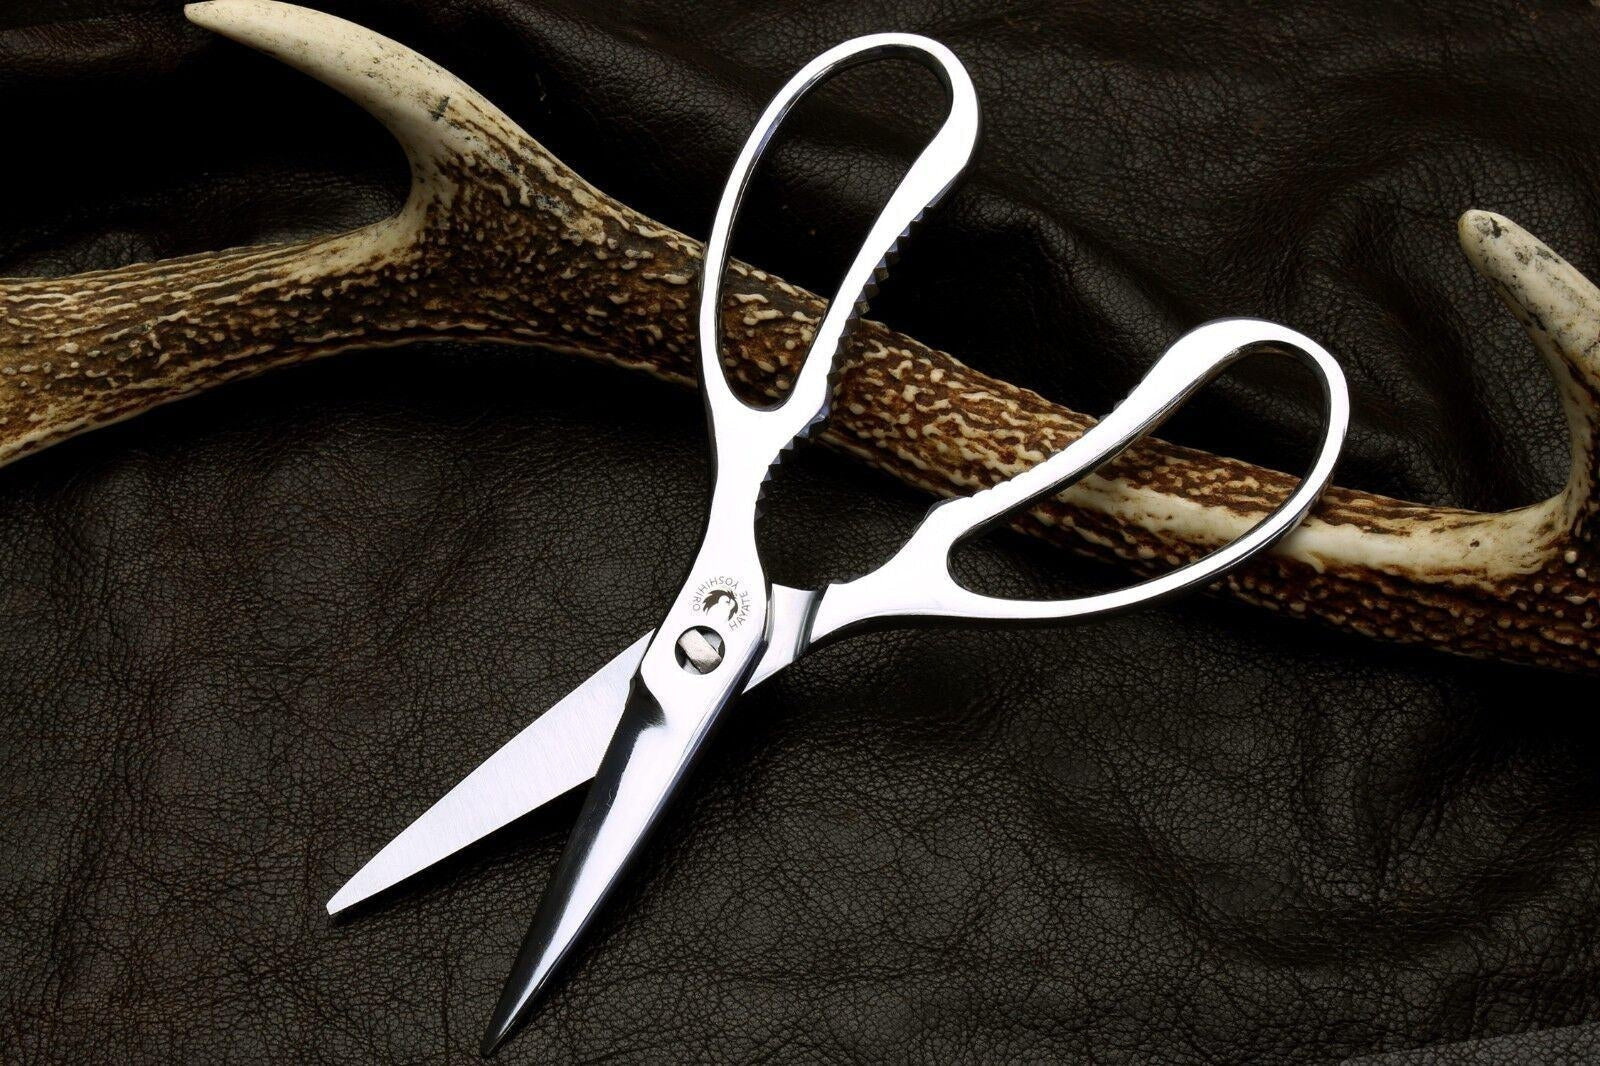 VERSAINSECT e in Japan] Kitchen Scissors All Purpose, Effortless Cutting,  Quality Japanese Ergonomic